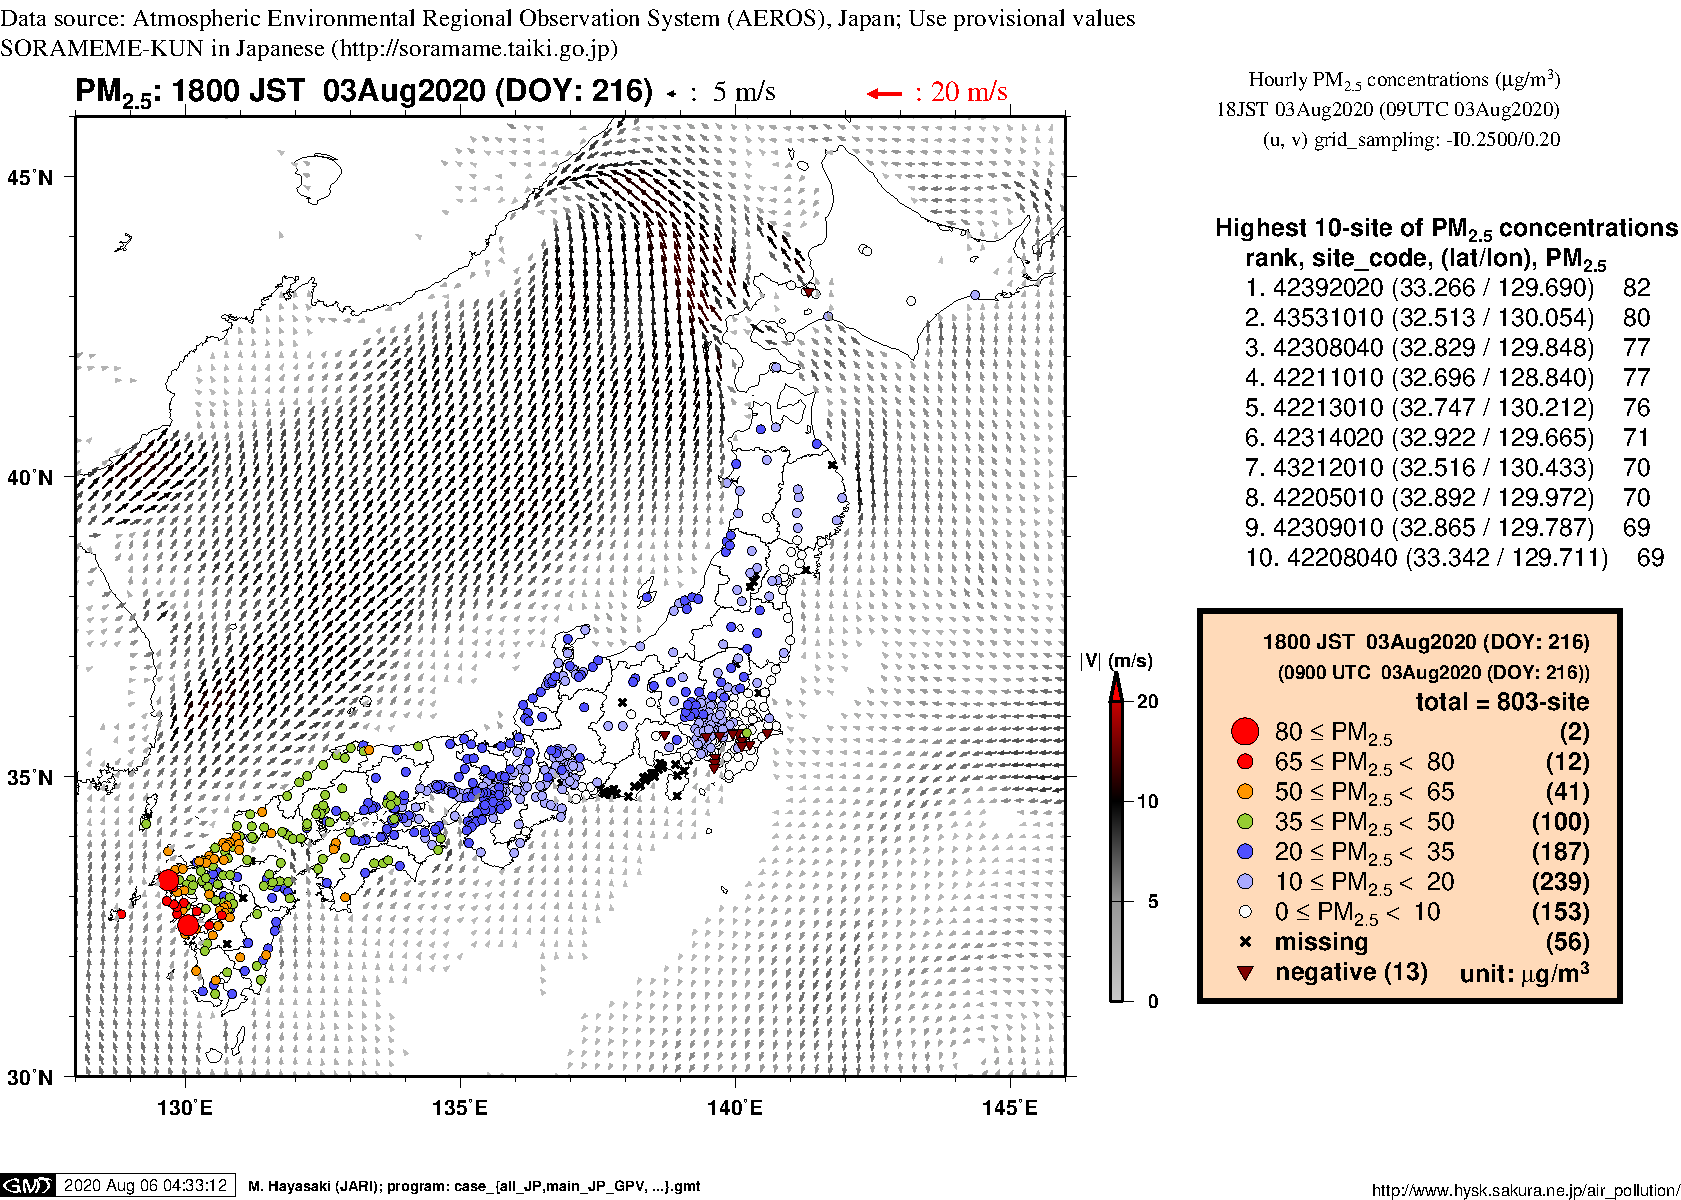 PM2.5 concentration in mainland Japan (18JST 03Aug2020)